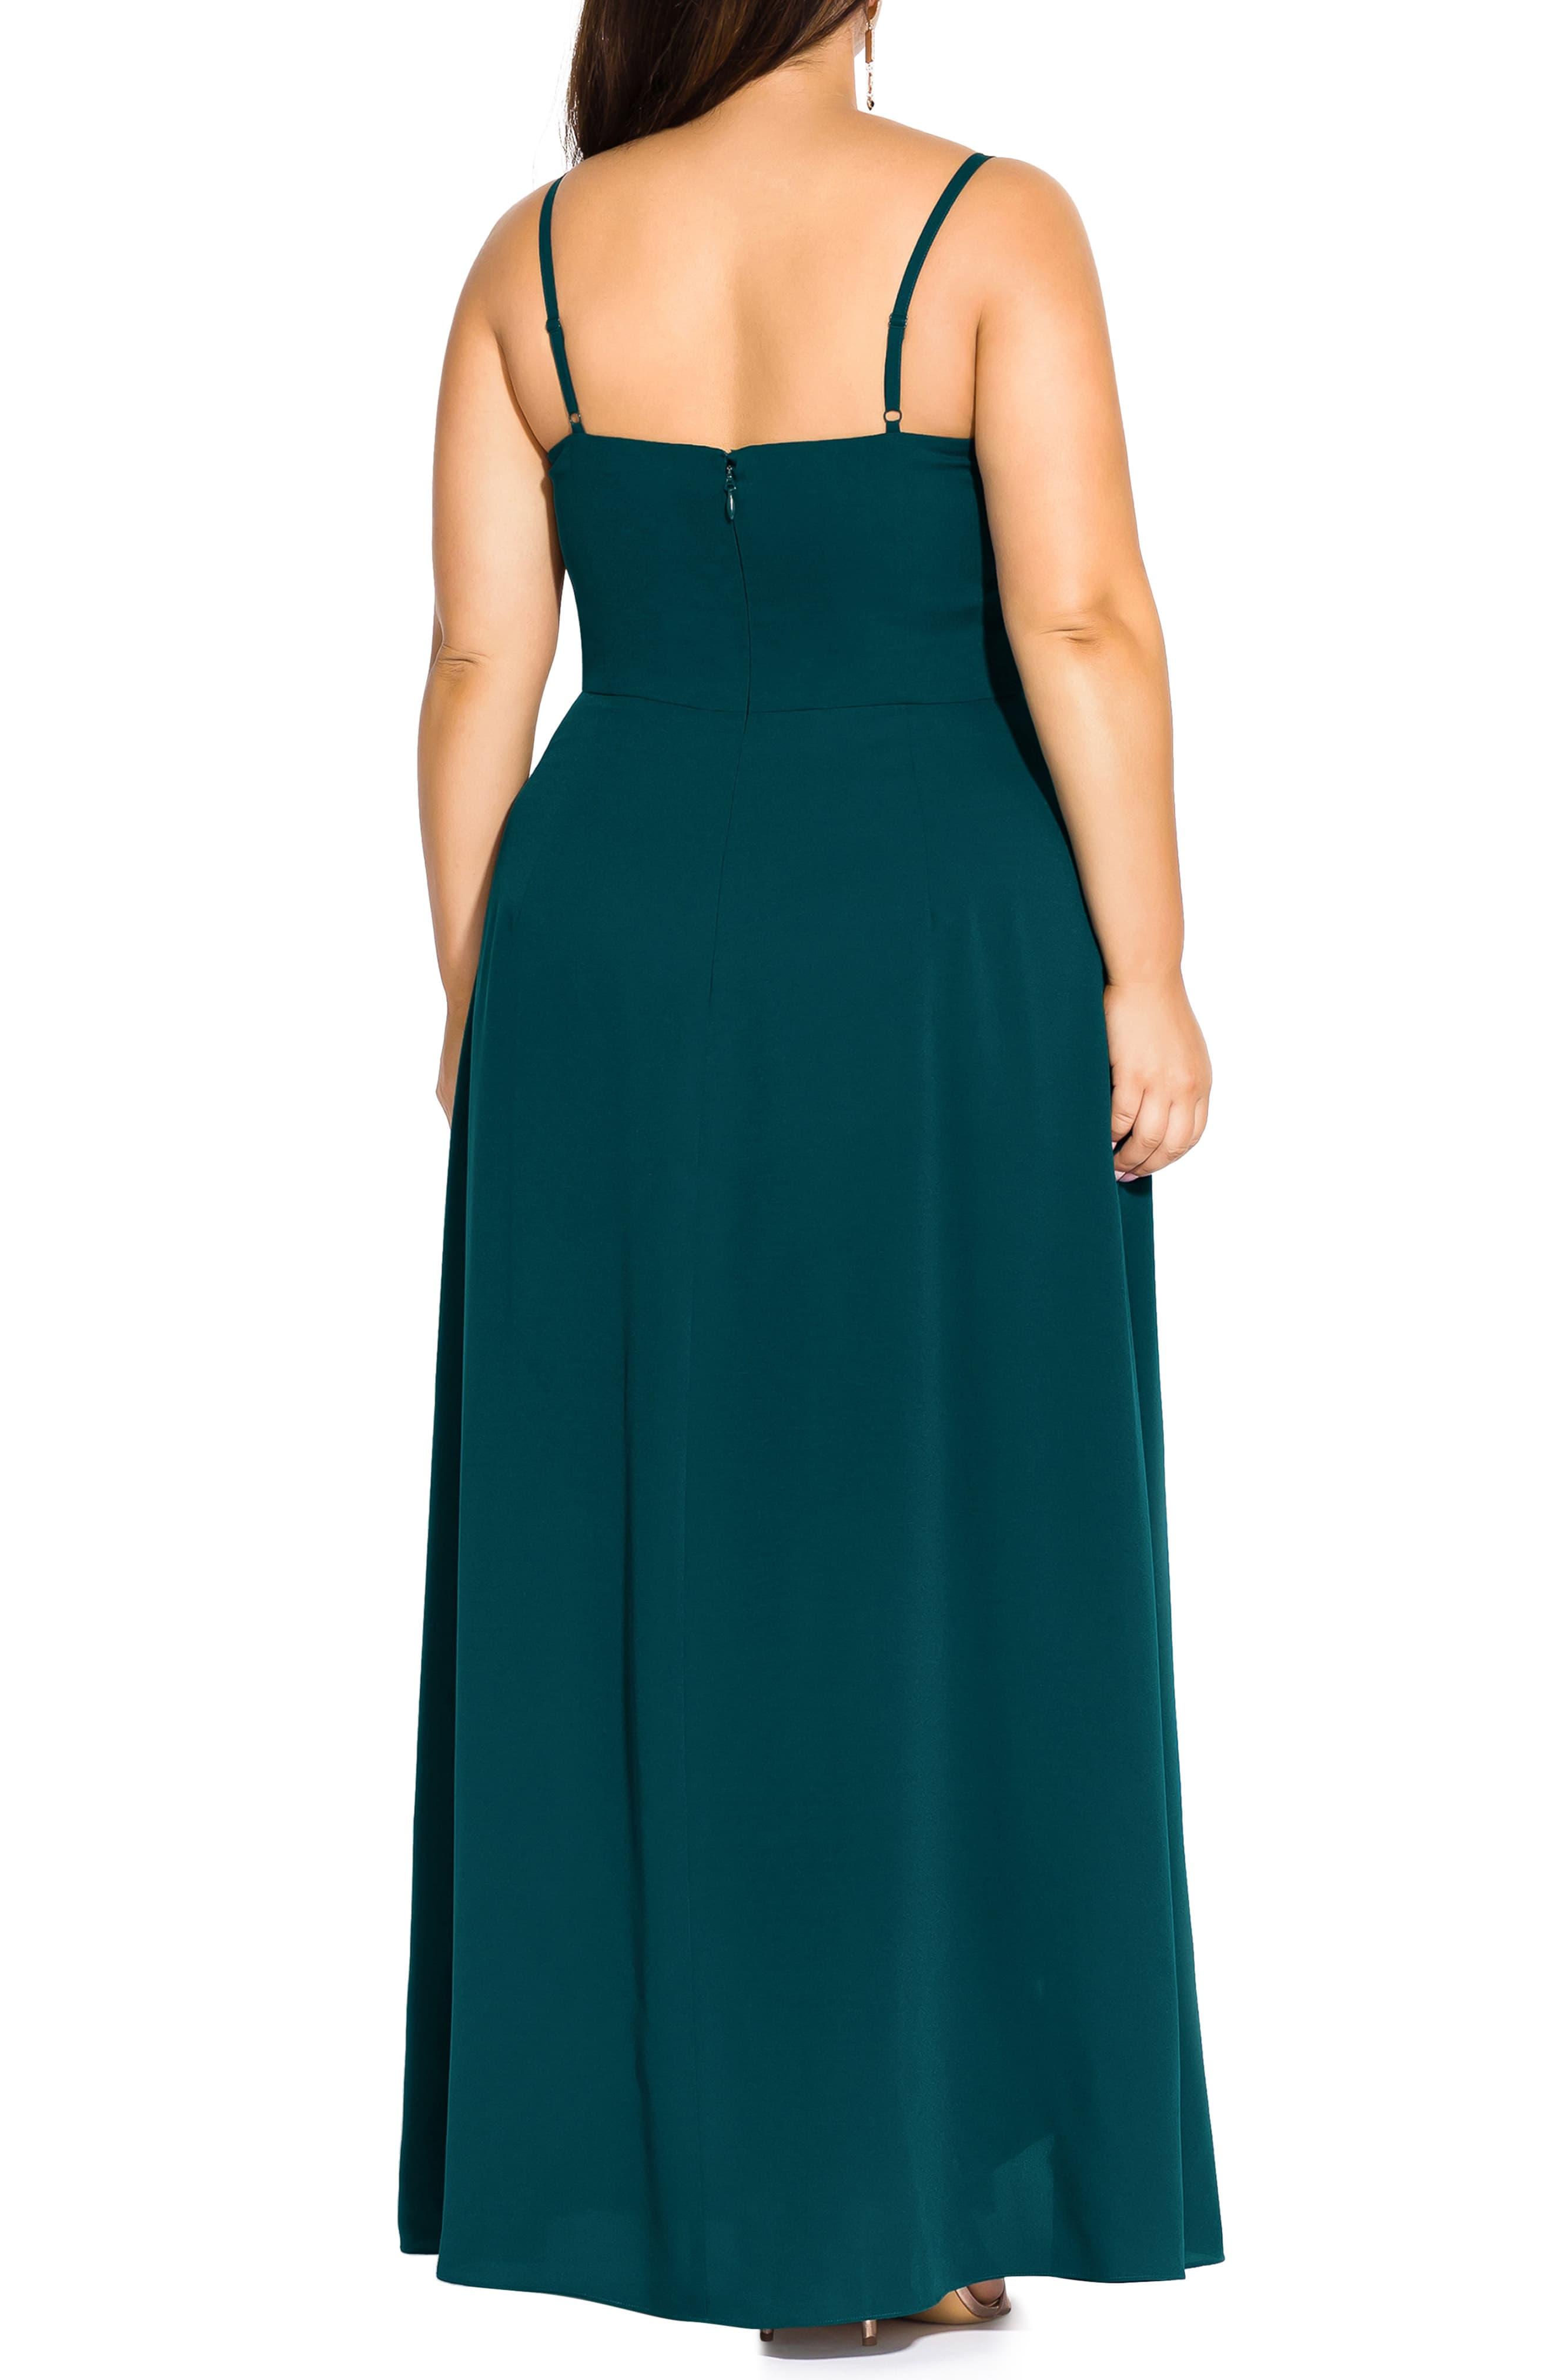 City Chic Catalina Maxi Dress in Emerald (Green) - Lyst